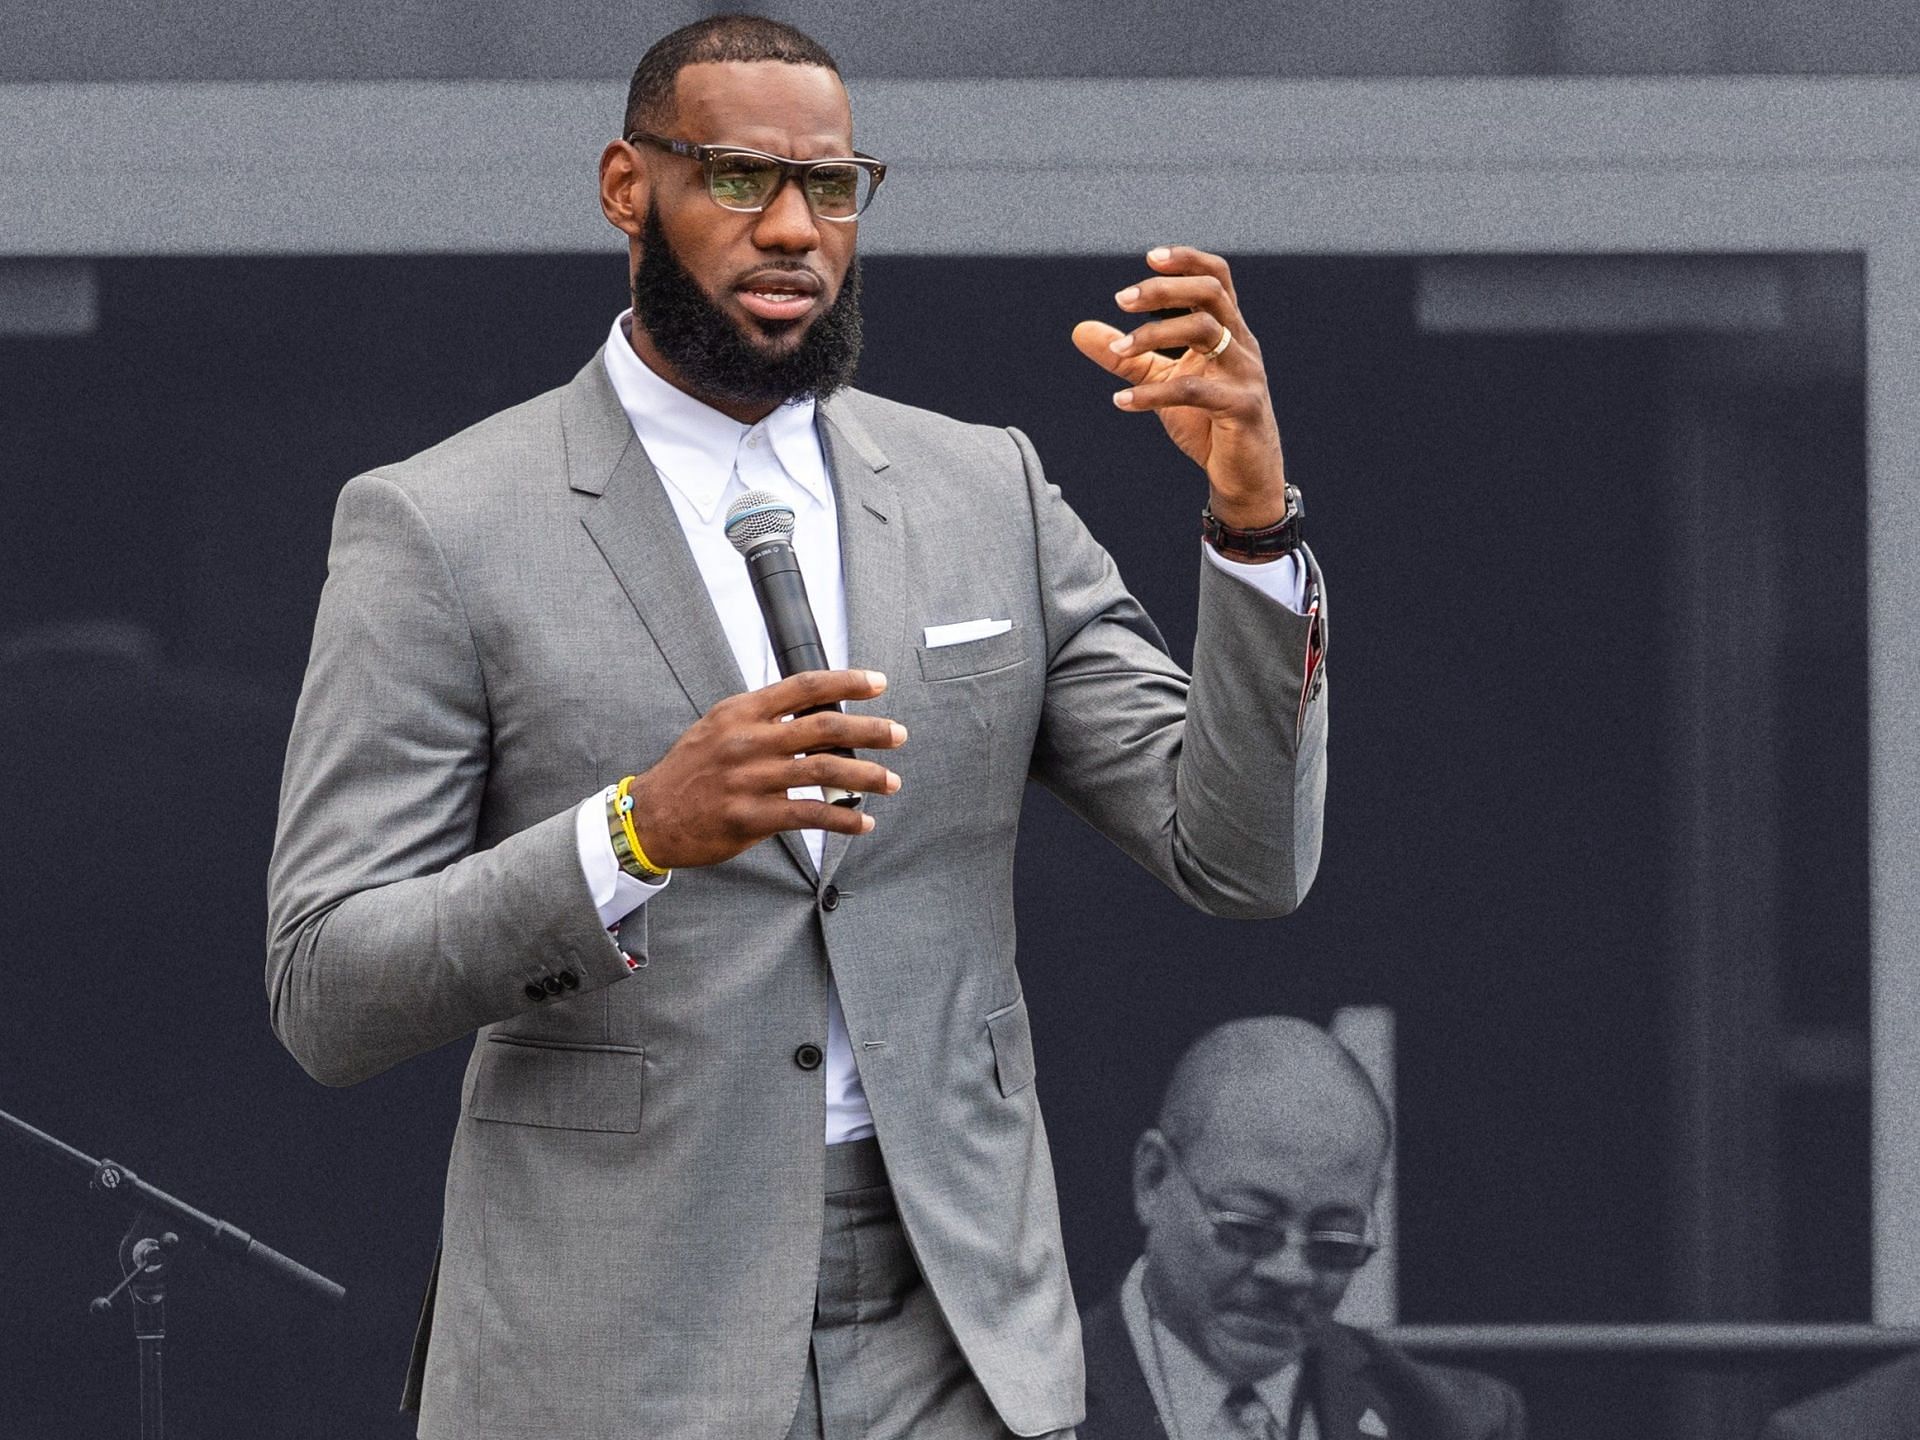 LeBron James could be a future team owner in the NBA [Photo: GQ]